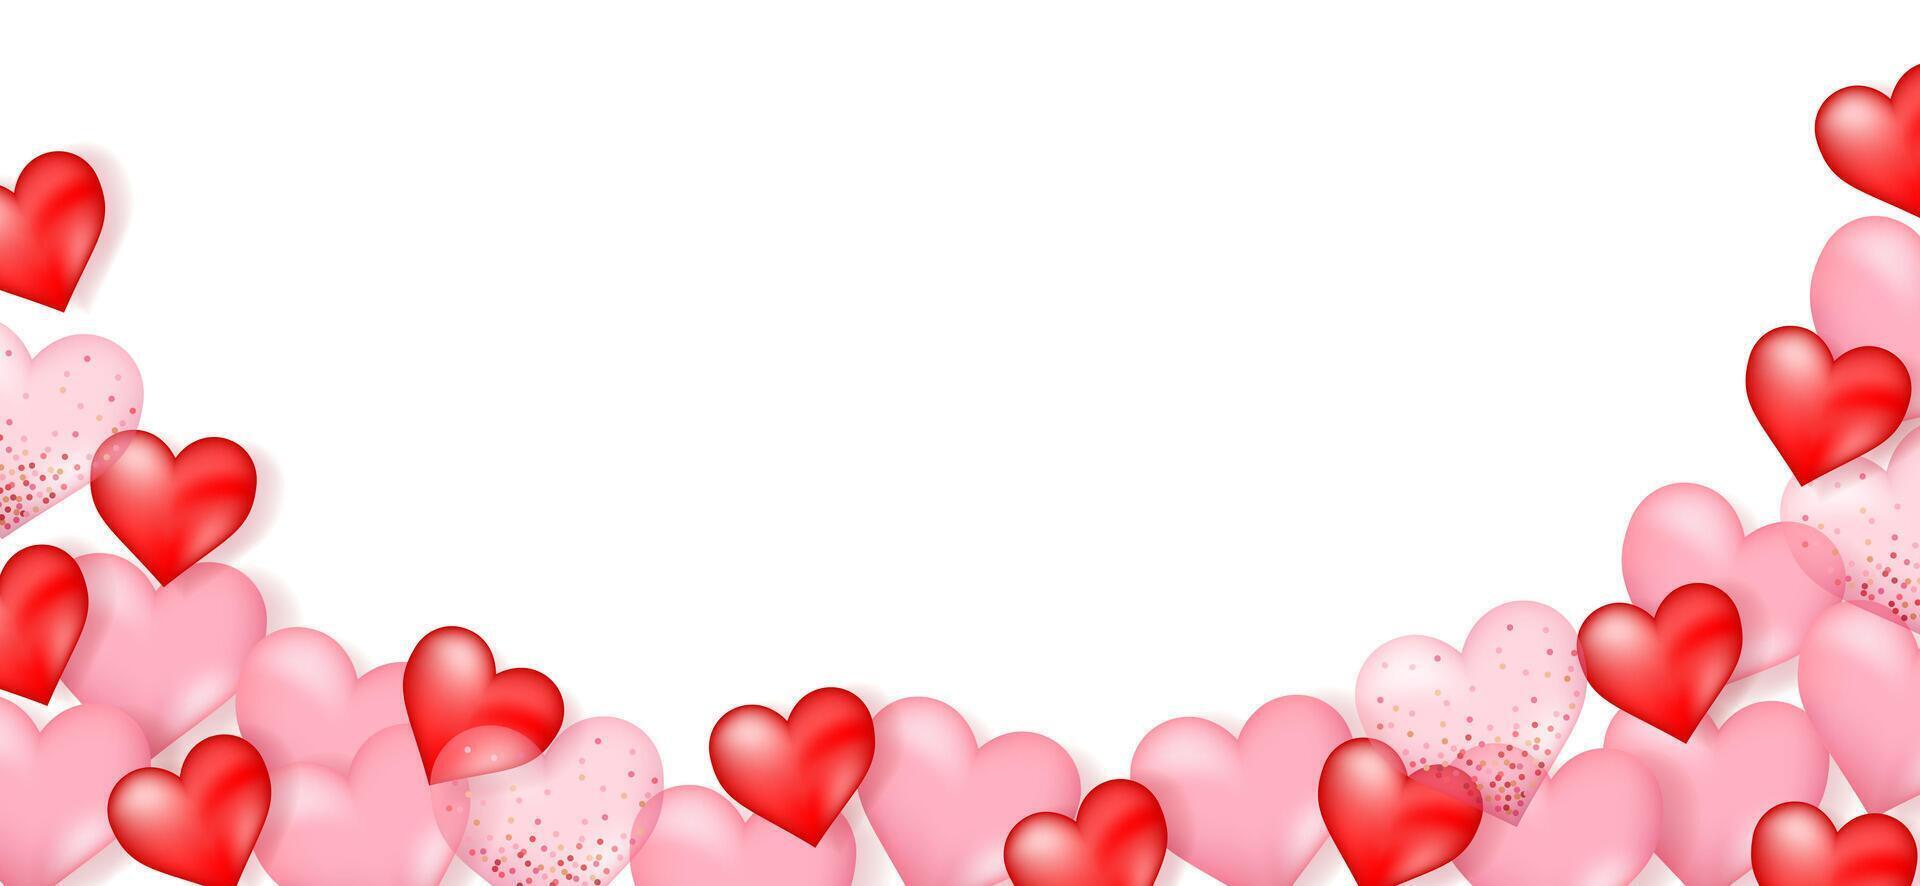 Valentine's day background. 3d hearts with place for text. Romantic sale banners templates, backdrop or invitation cards for wedding. Vector illustration.